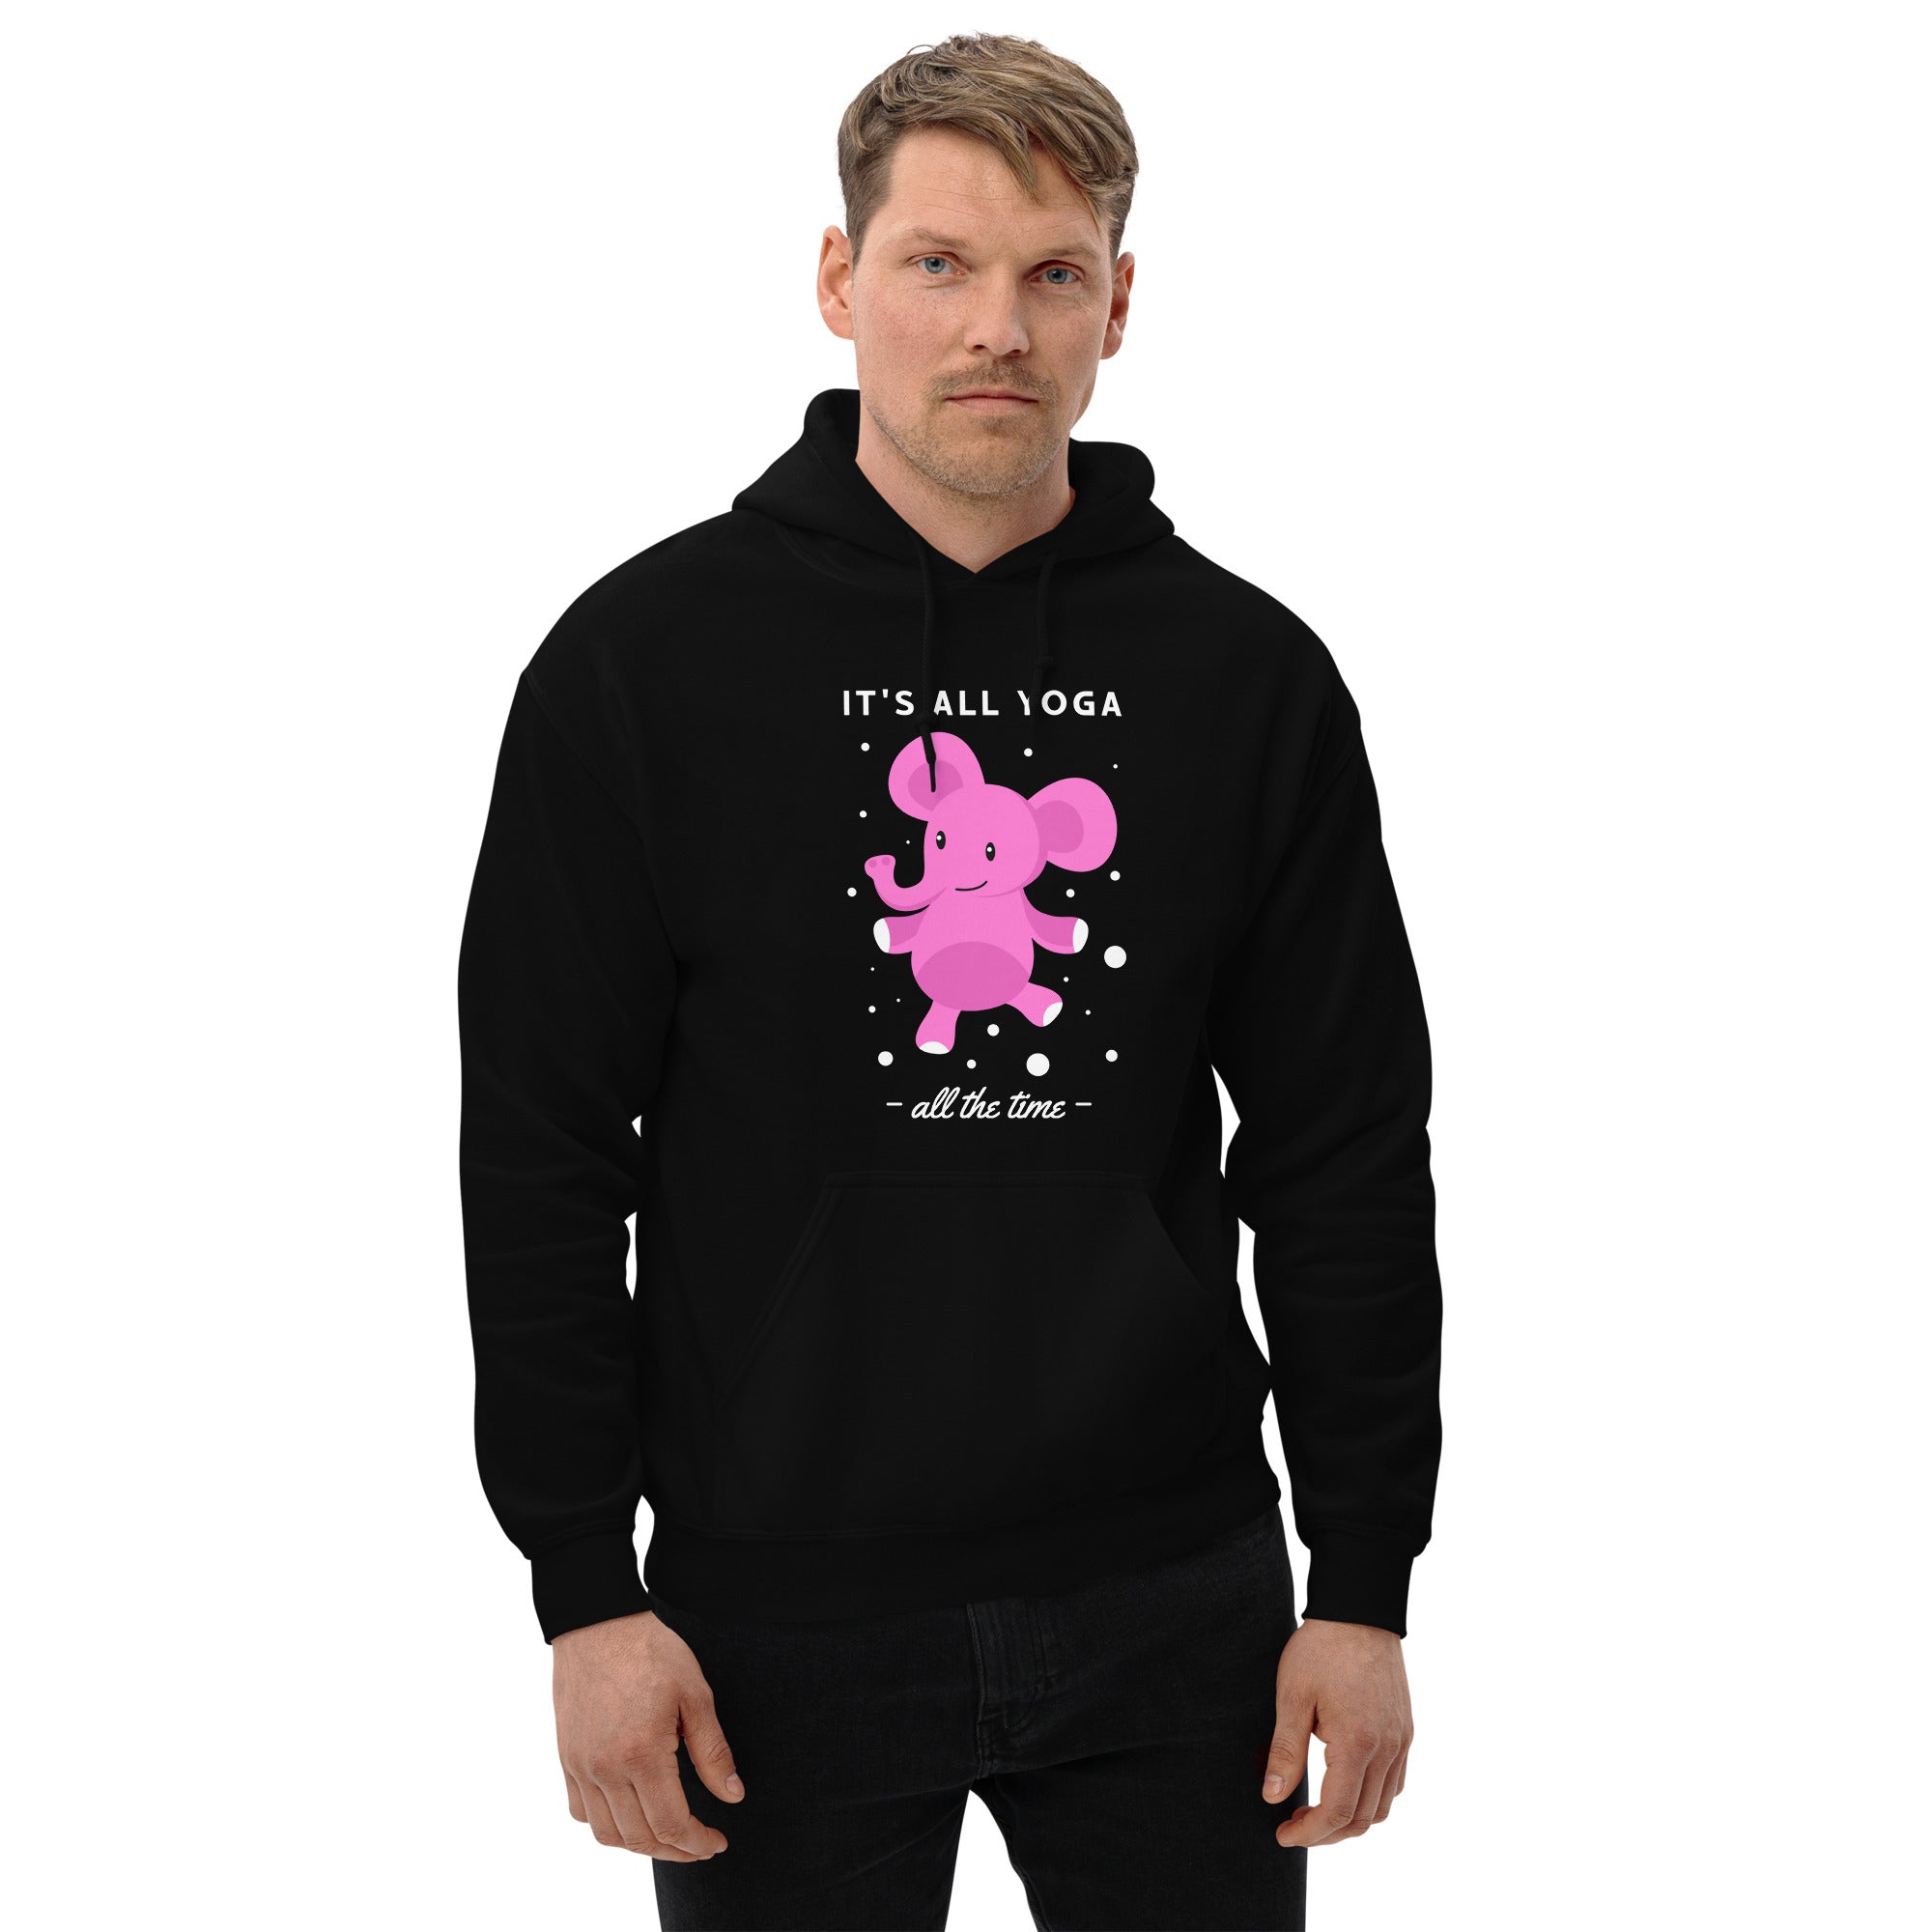 All Yoga All The Time - Unisex Hoodie